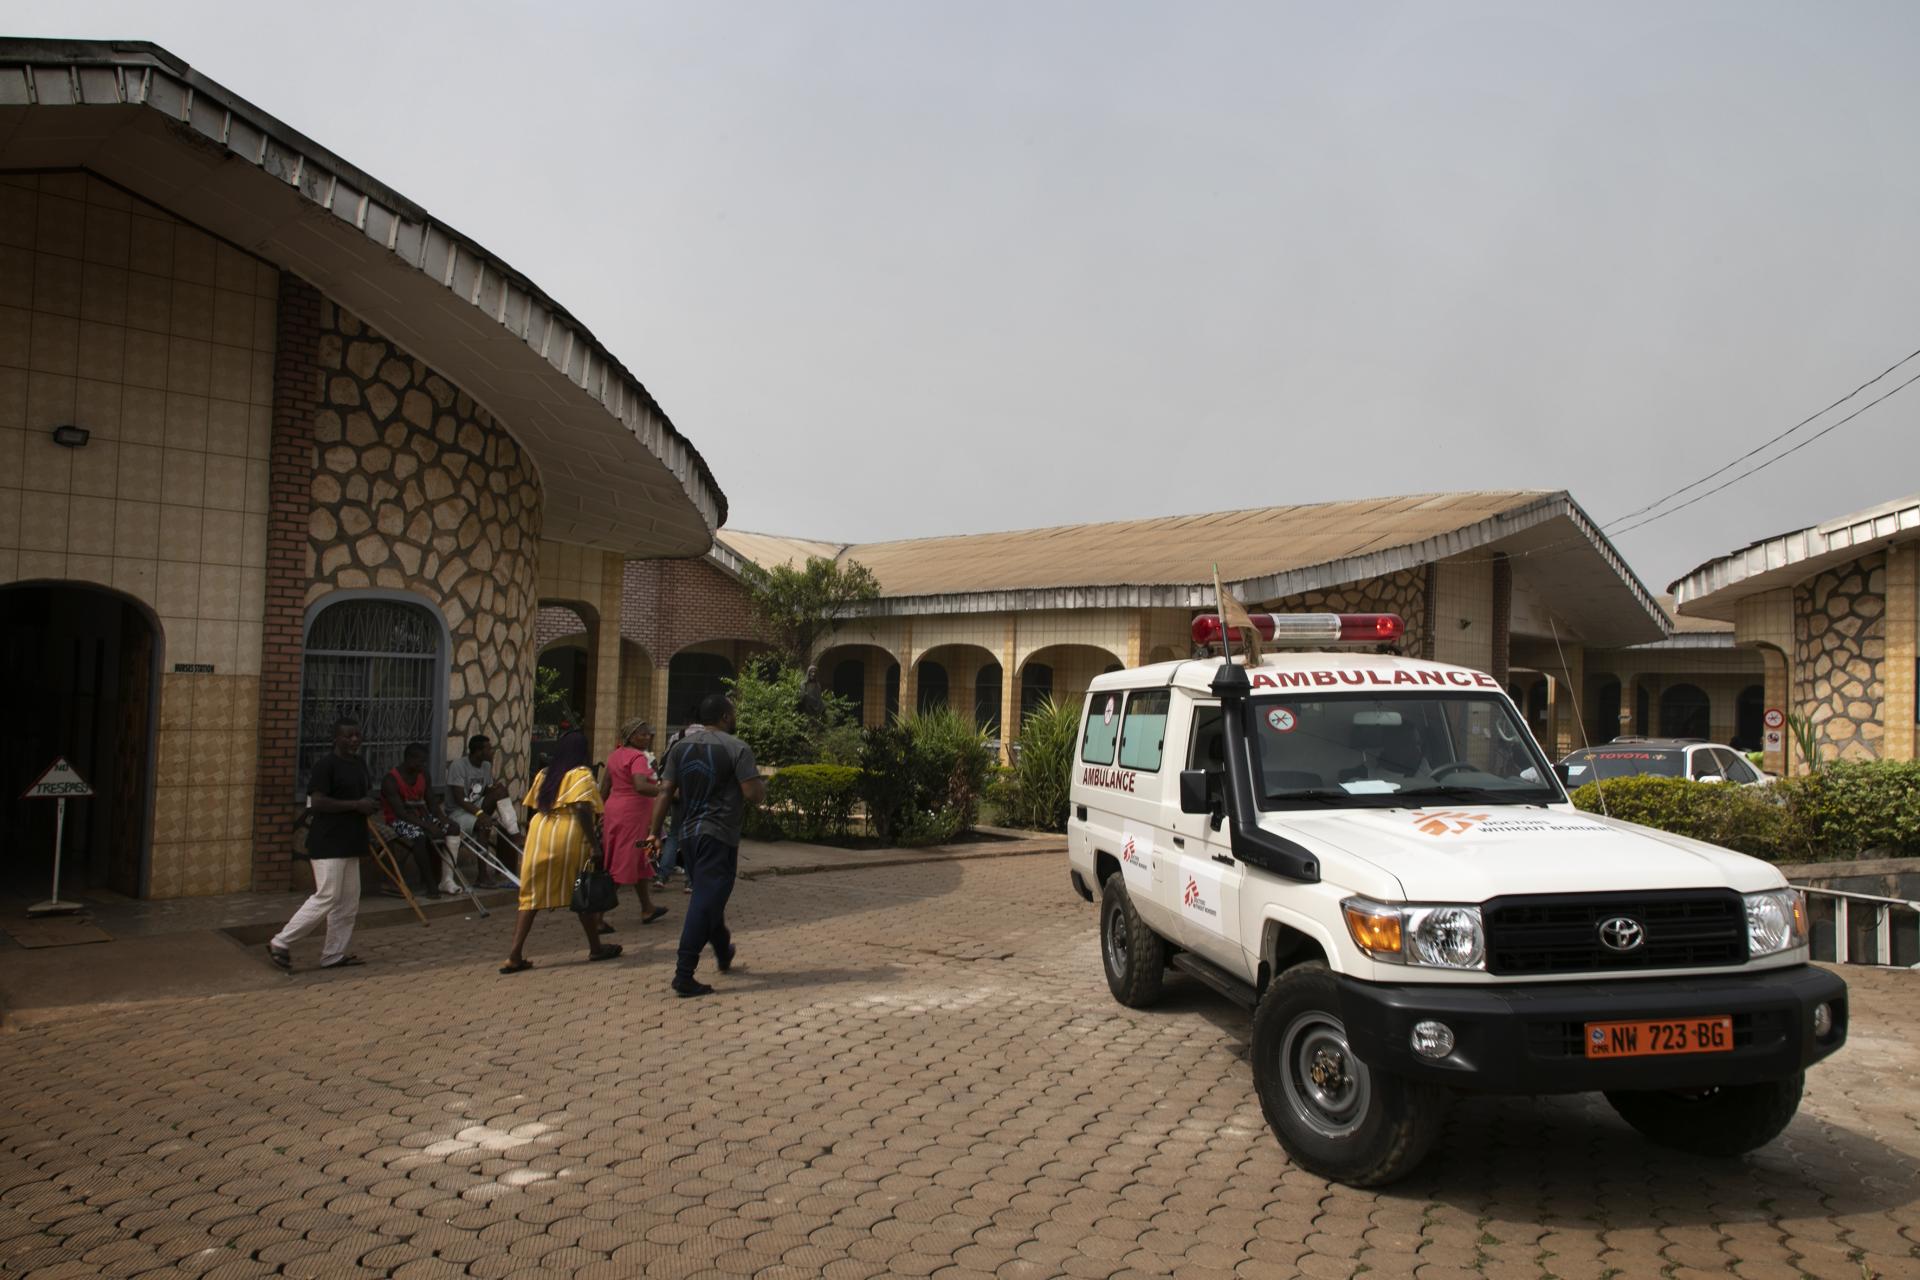 A View of the inner courtyard and ambulance parking lot of MSF-supported Saint Mary Soledad hospital in Bamenda, North-West Cameroon.